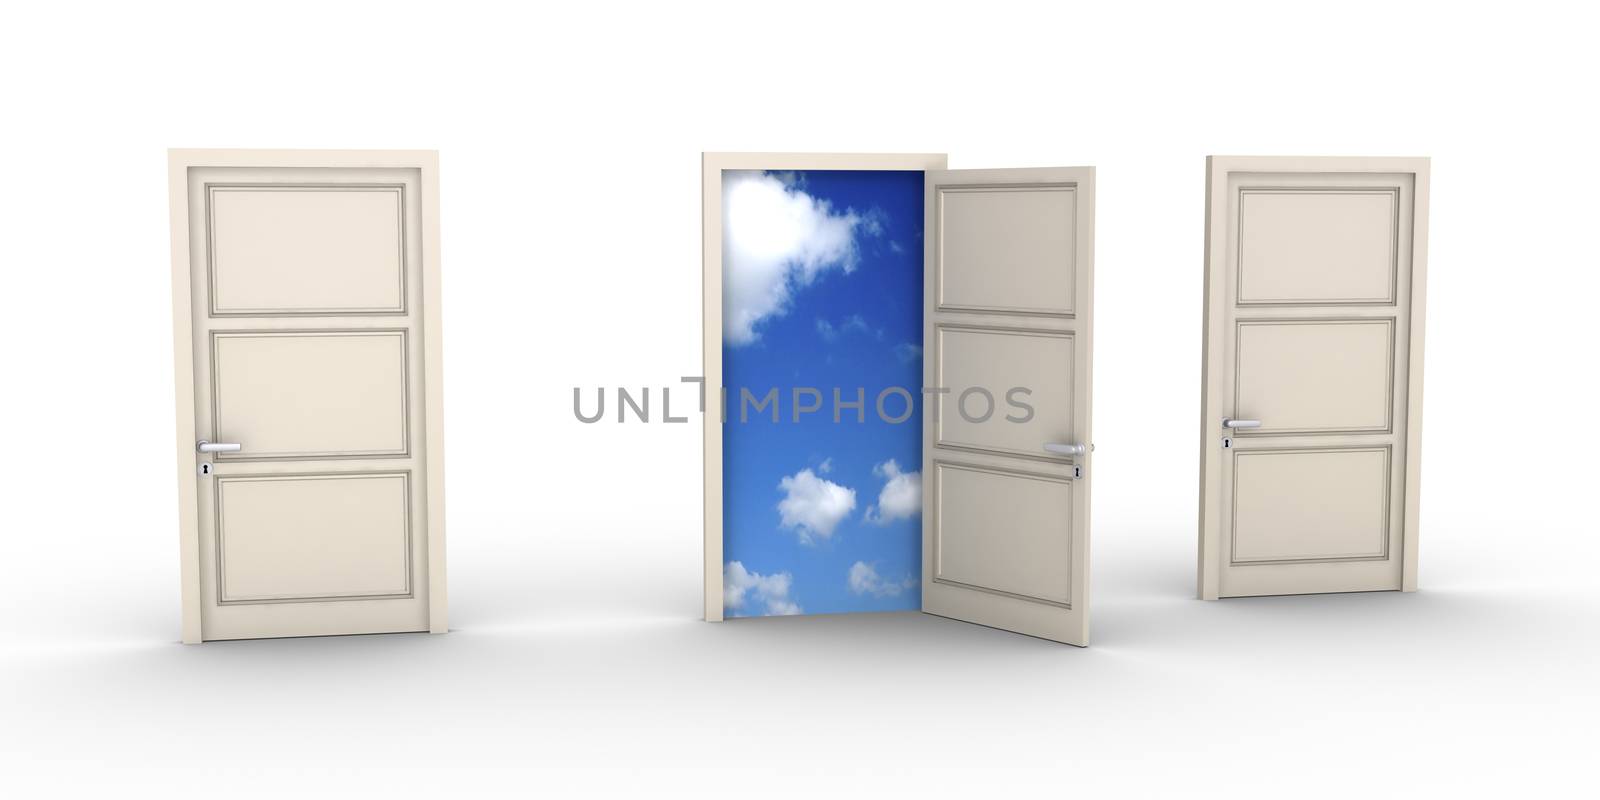 Three doors but one is opened and the blue sky appears